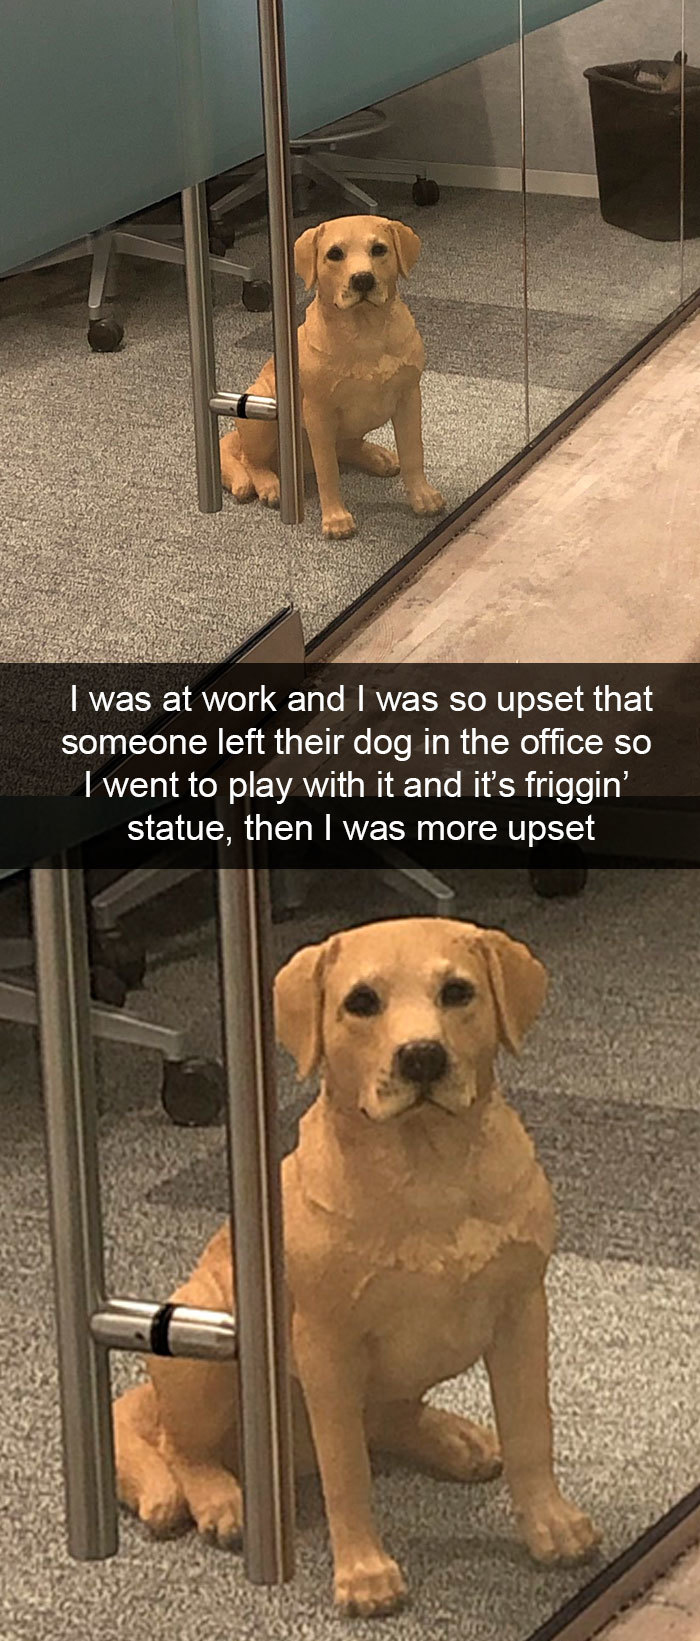 Dog - I was at work and I was so upset that someone left their dog in the office so I went to play with it and it's friggin' statue, then I was more upset